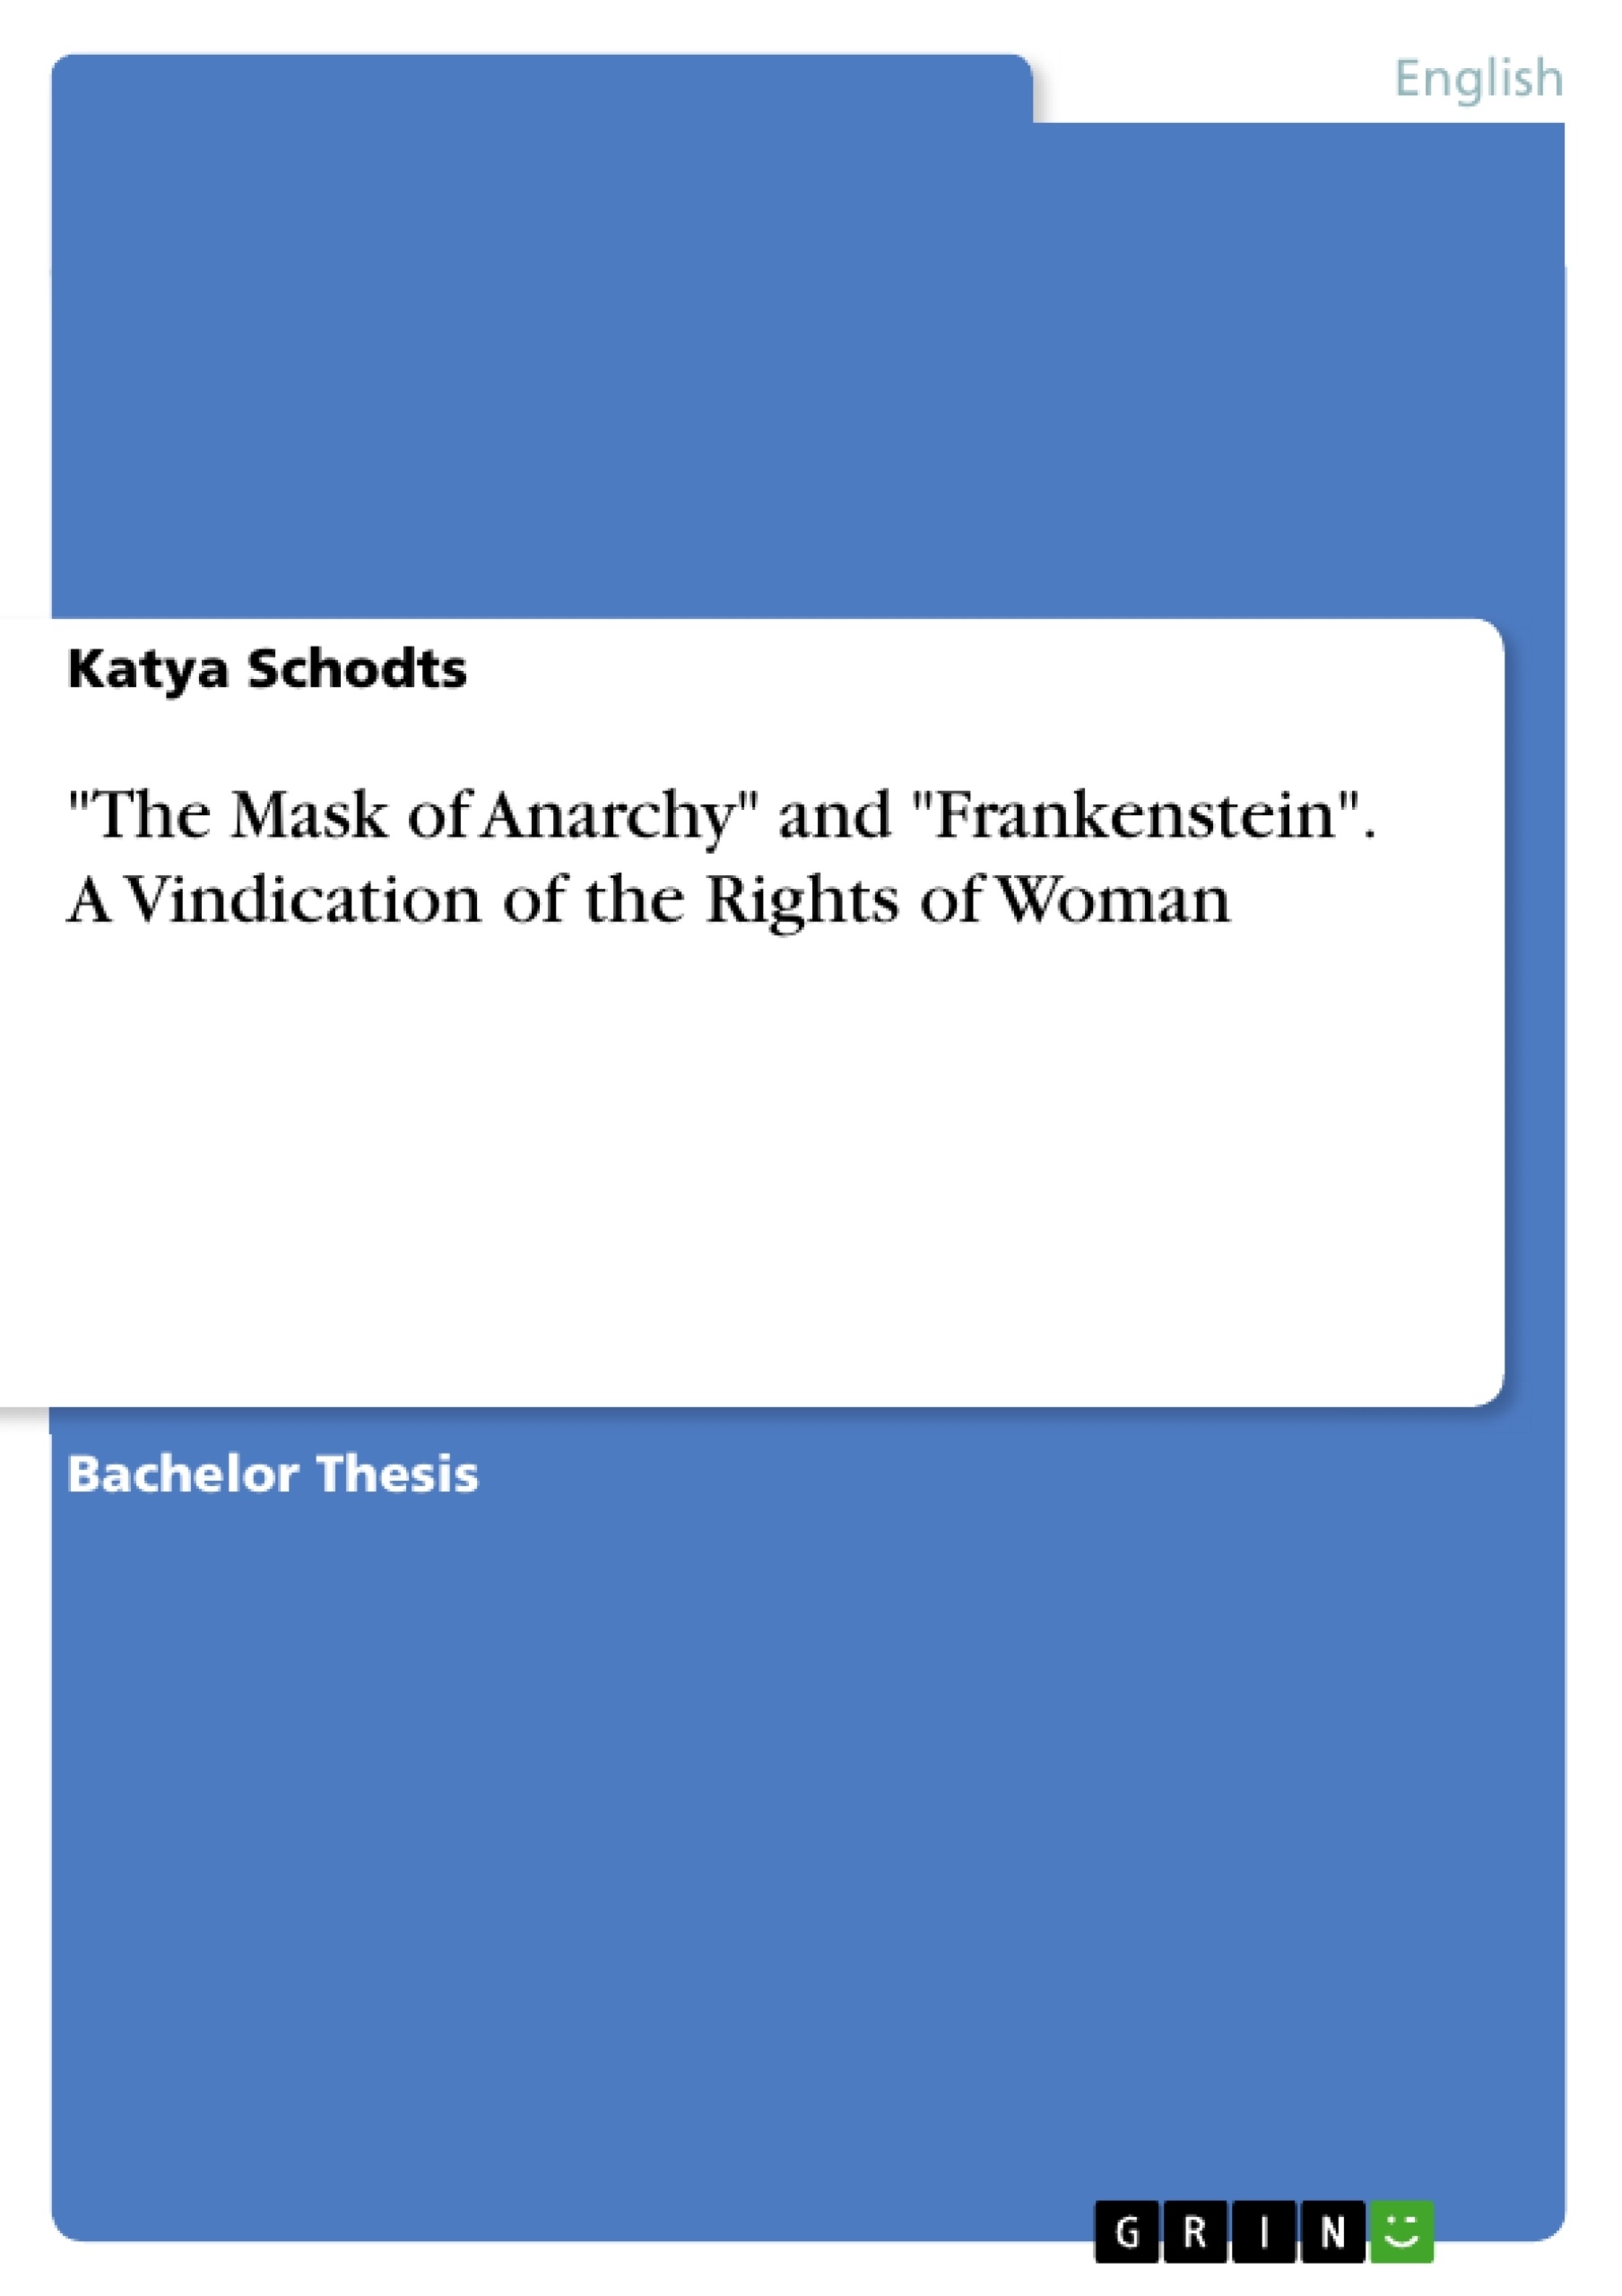 Titre: "The Mask of Anarchy" and "Frankenstein". A Vindication of the Rights of Woman